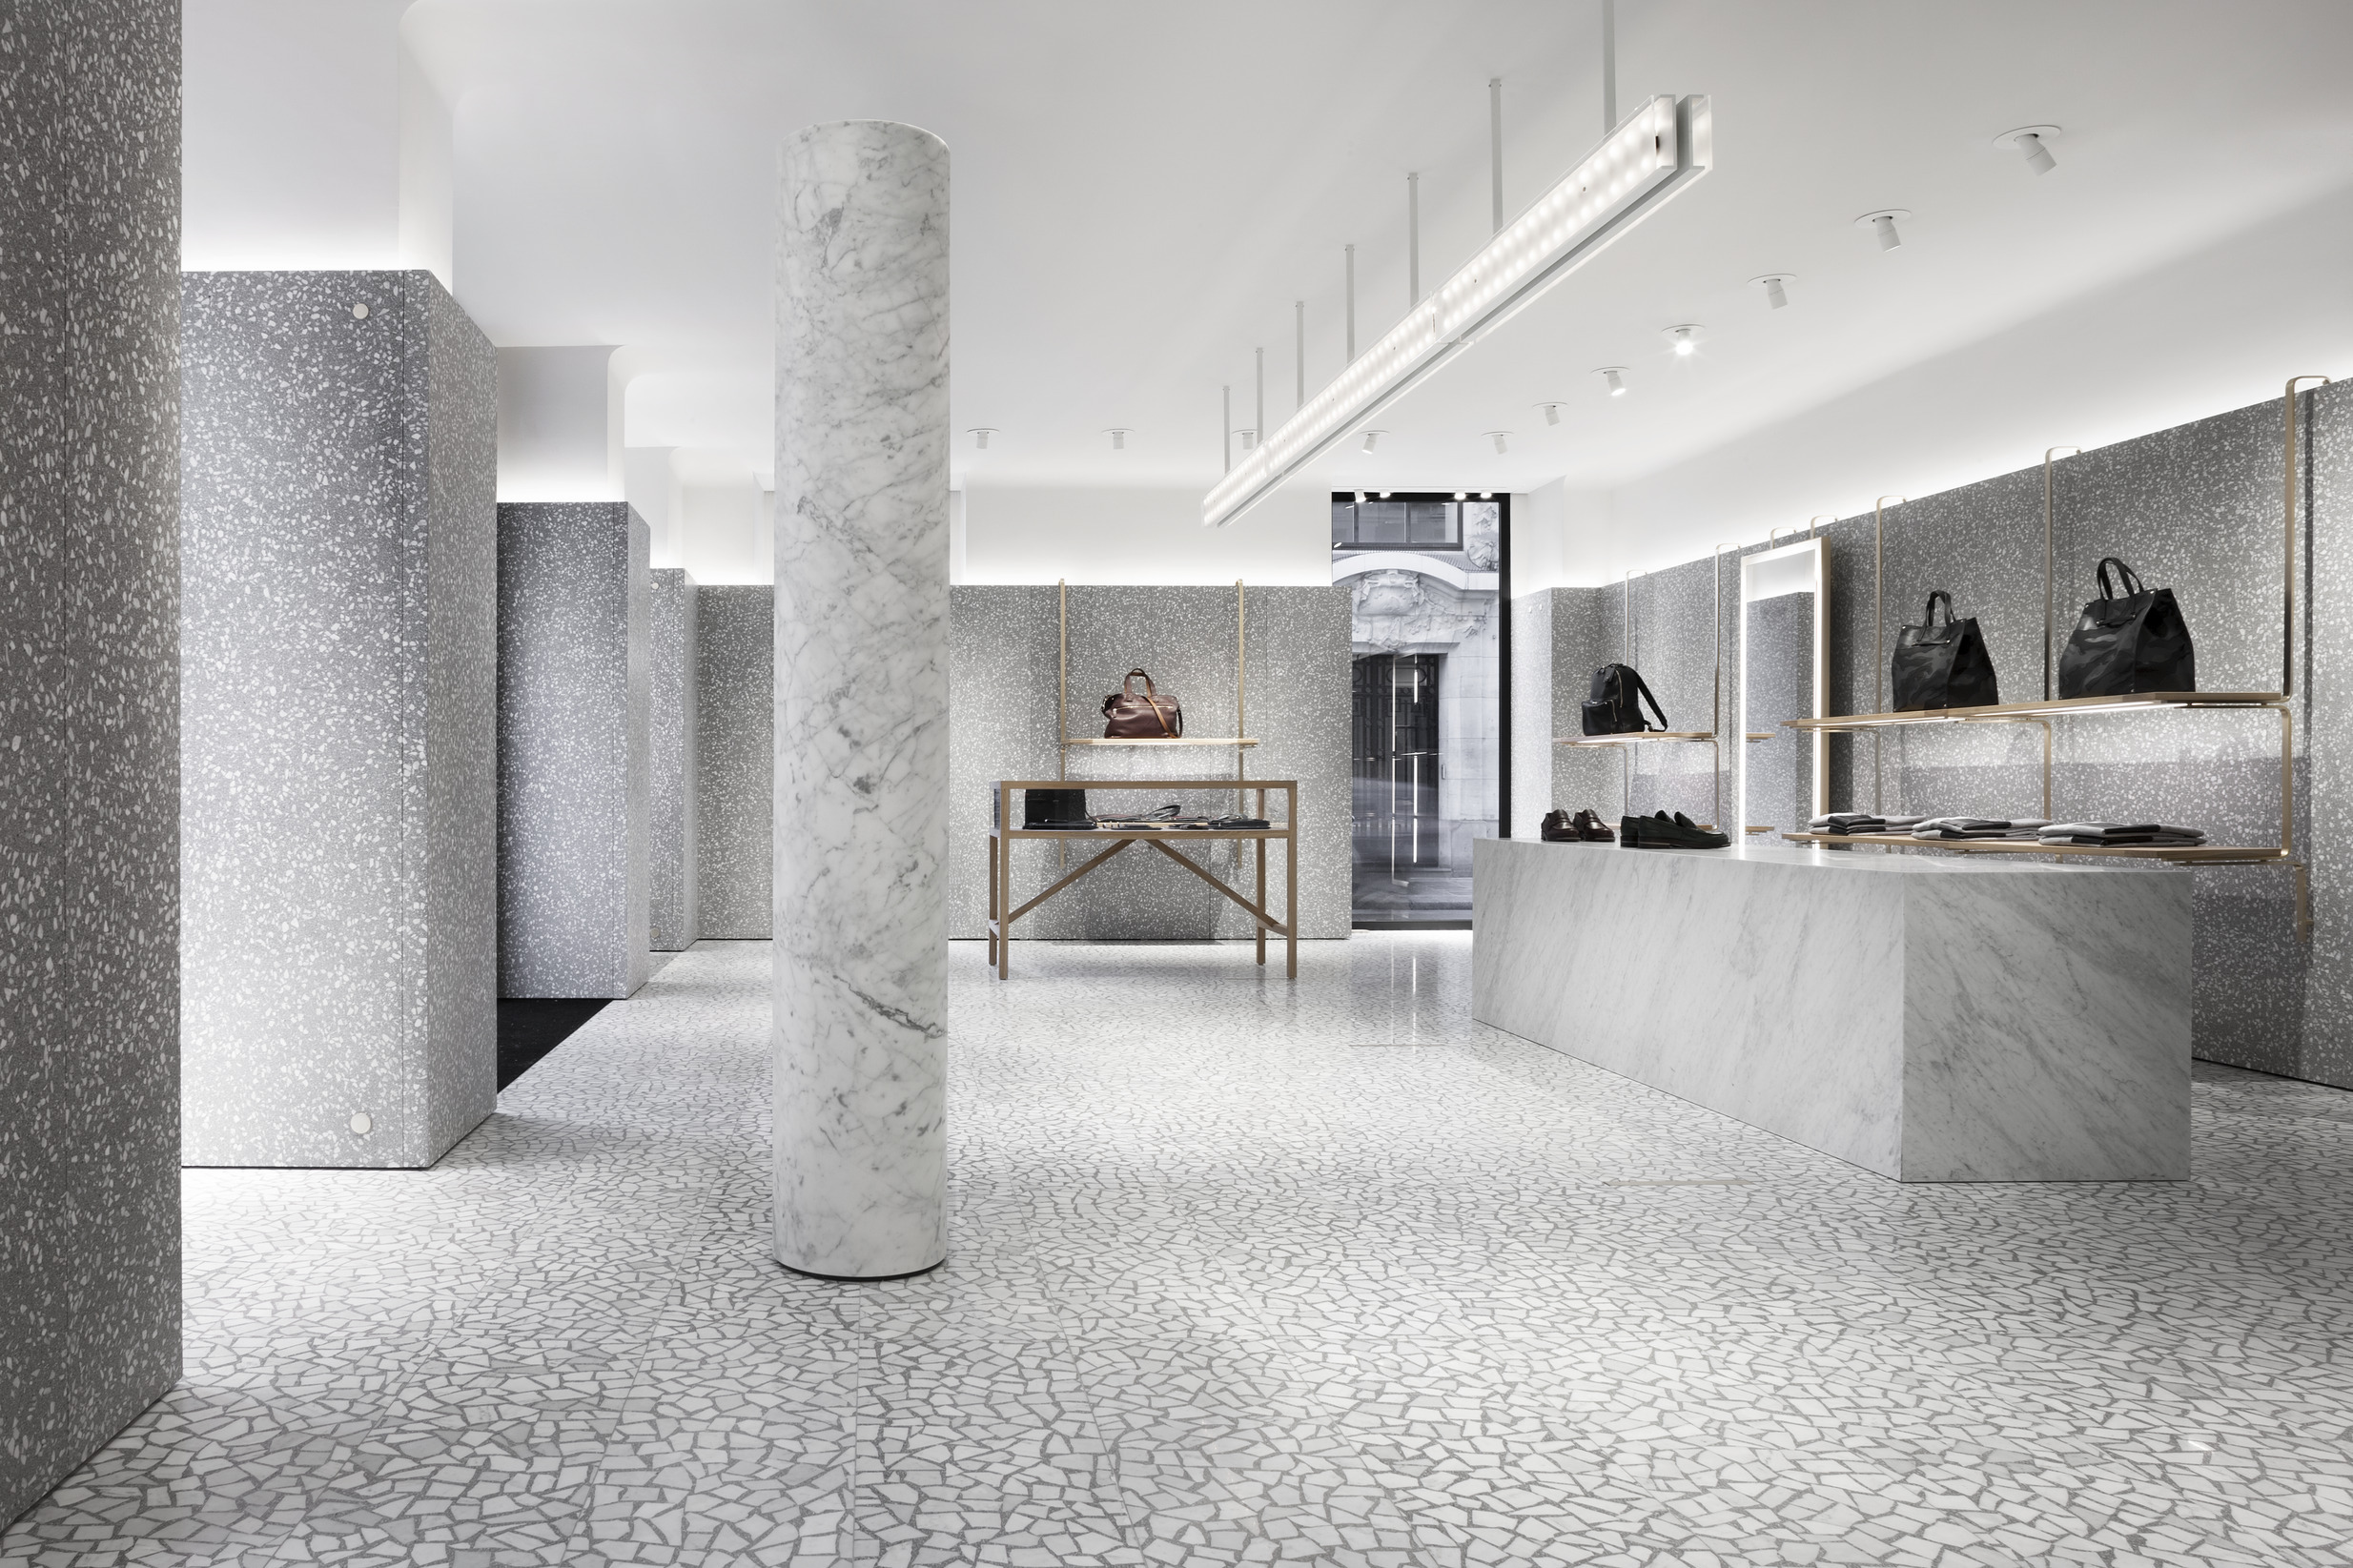 The Valentino Man store in Paris is characterised by spaces with a strong articulation of walls and partitions.